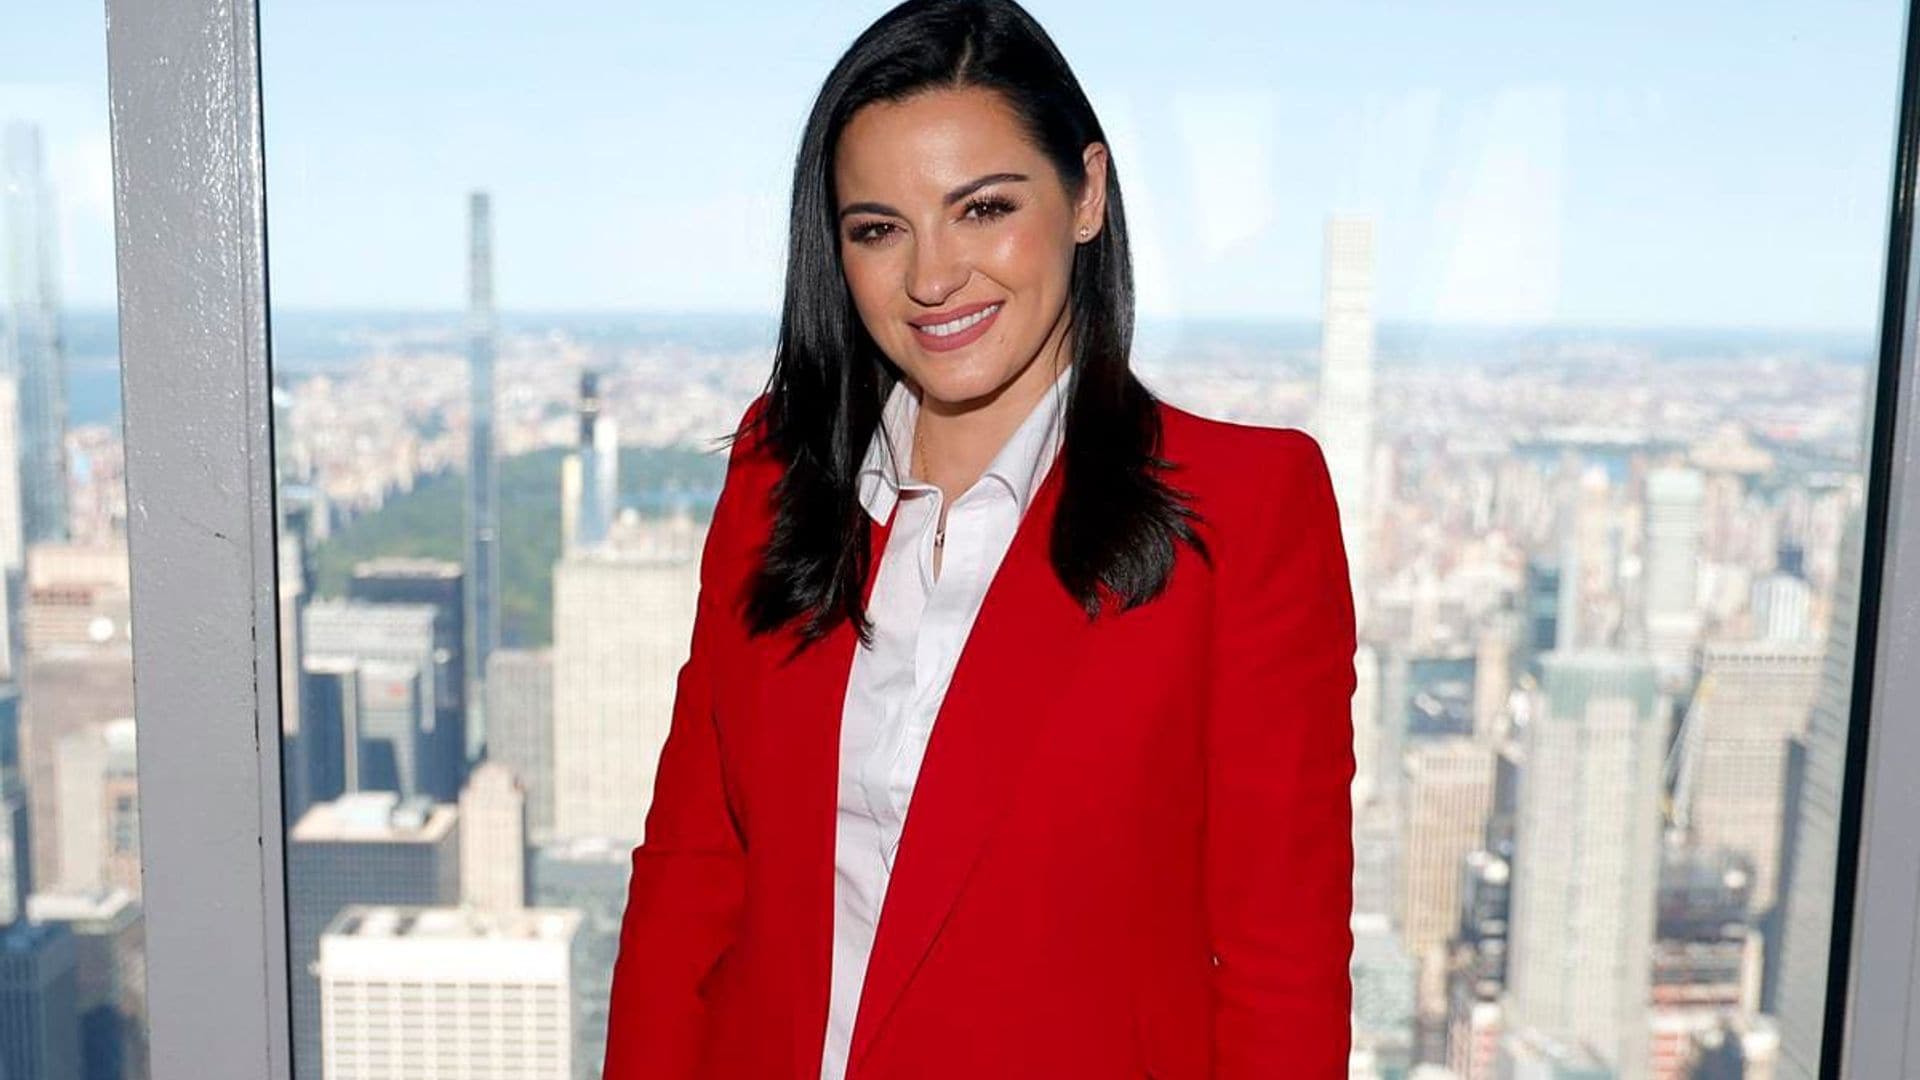 Maite Perroni celebrated her adorable baby shower